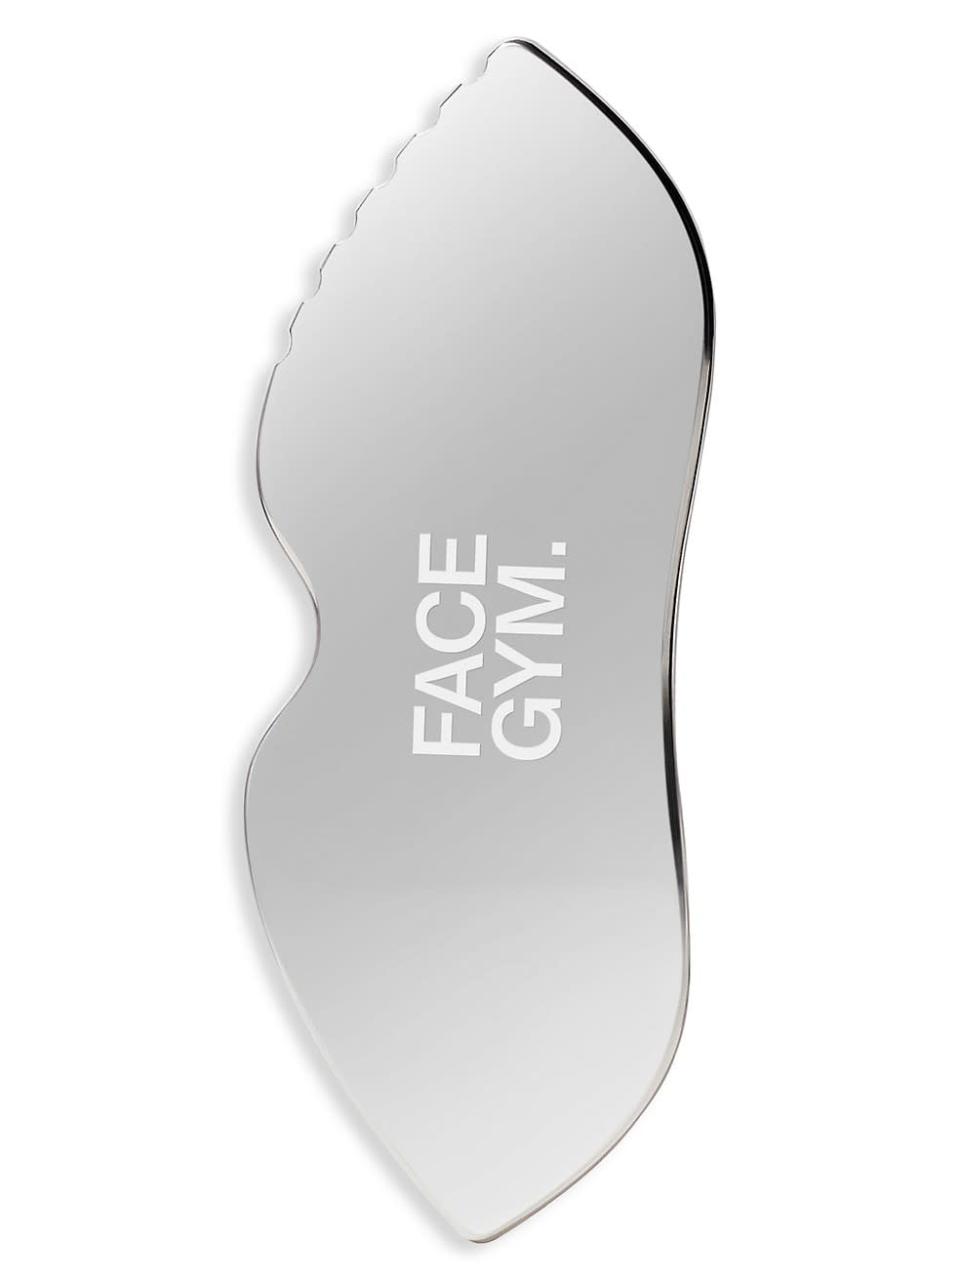 <h2>FaceGym Multi-Sculpt Gua Sha Tool</h2><br>Traditional jade and rose quartz gua sha get a modern makeover with FaceGym's medical-grade stainless steel version, which features various grooves and edges to sculpt and contour facial muscles.<br><br><em>Shop <strong><a href="https://www.saksfifthavenue.com/brand/facegym" rel="nofollow noopener" target="_blank" data-ylk="slk:FaceGym" class="link ">FaceGym</a></strong></em><br><br><strong>FACEGYM</strong> Multi-Sculpt Gua Sha Tool, $, available at <a href="https://go.skimresources.com/?id=30283X879131&url=https%3A%2F%2Fwww.saksfifthavenue.com%2Fproduct%2Ffacegym-multi-sculpt-gua-sha-tool-0400014396383.html%3F" rel="nofollow noopener" target="_blank" data-ylk="slk:Saks Fifth Avenue" class="link ">Saks Fifth Avenue</a>